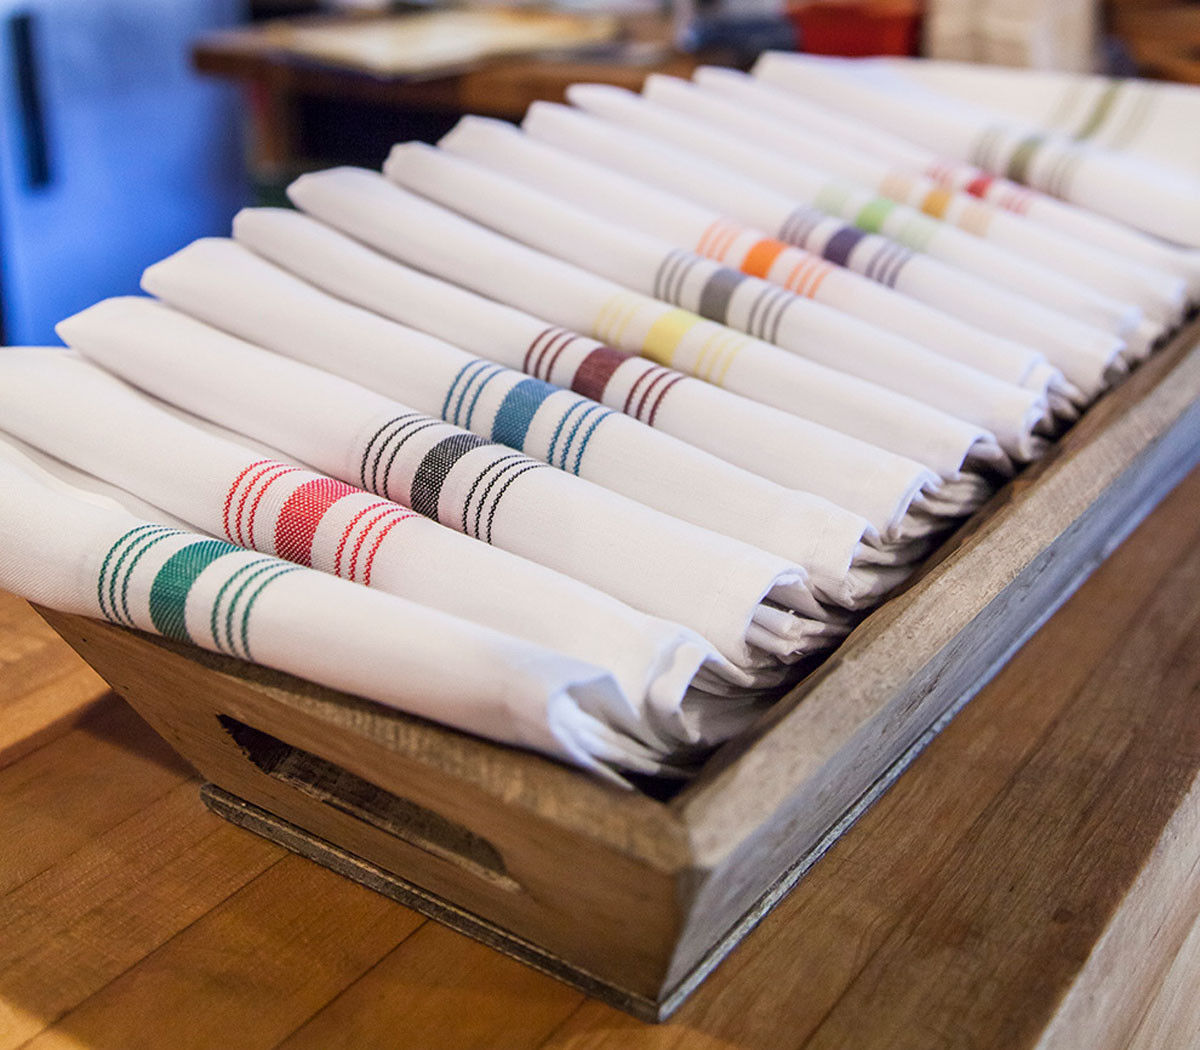 In which country are the Milliken Signature Stripe Bistro Napkins produced?